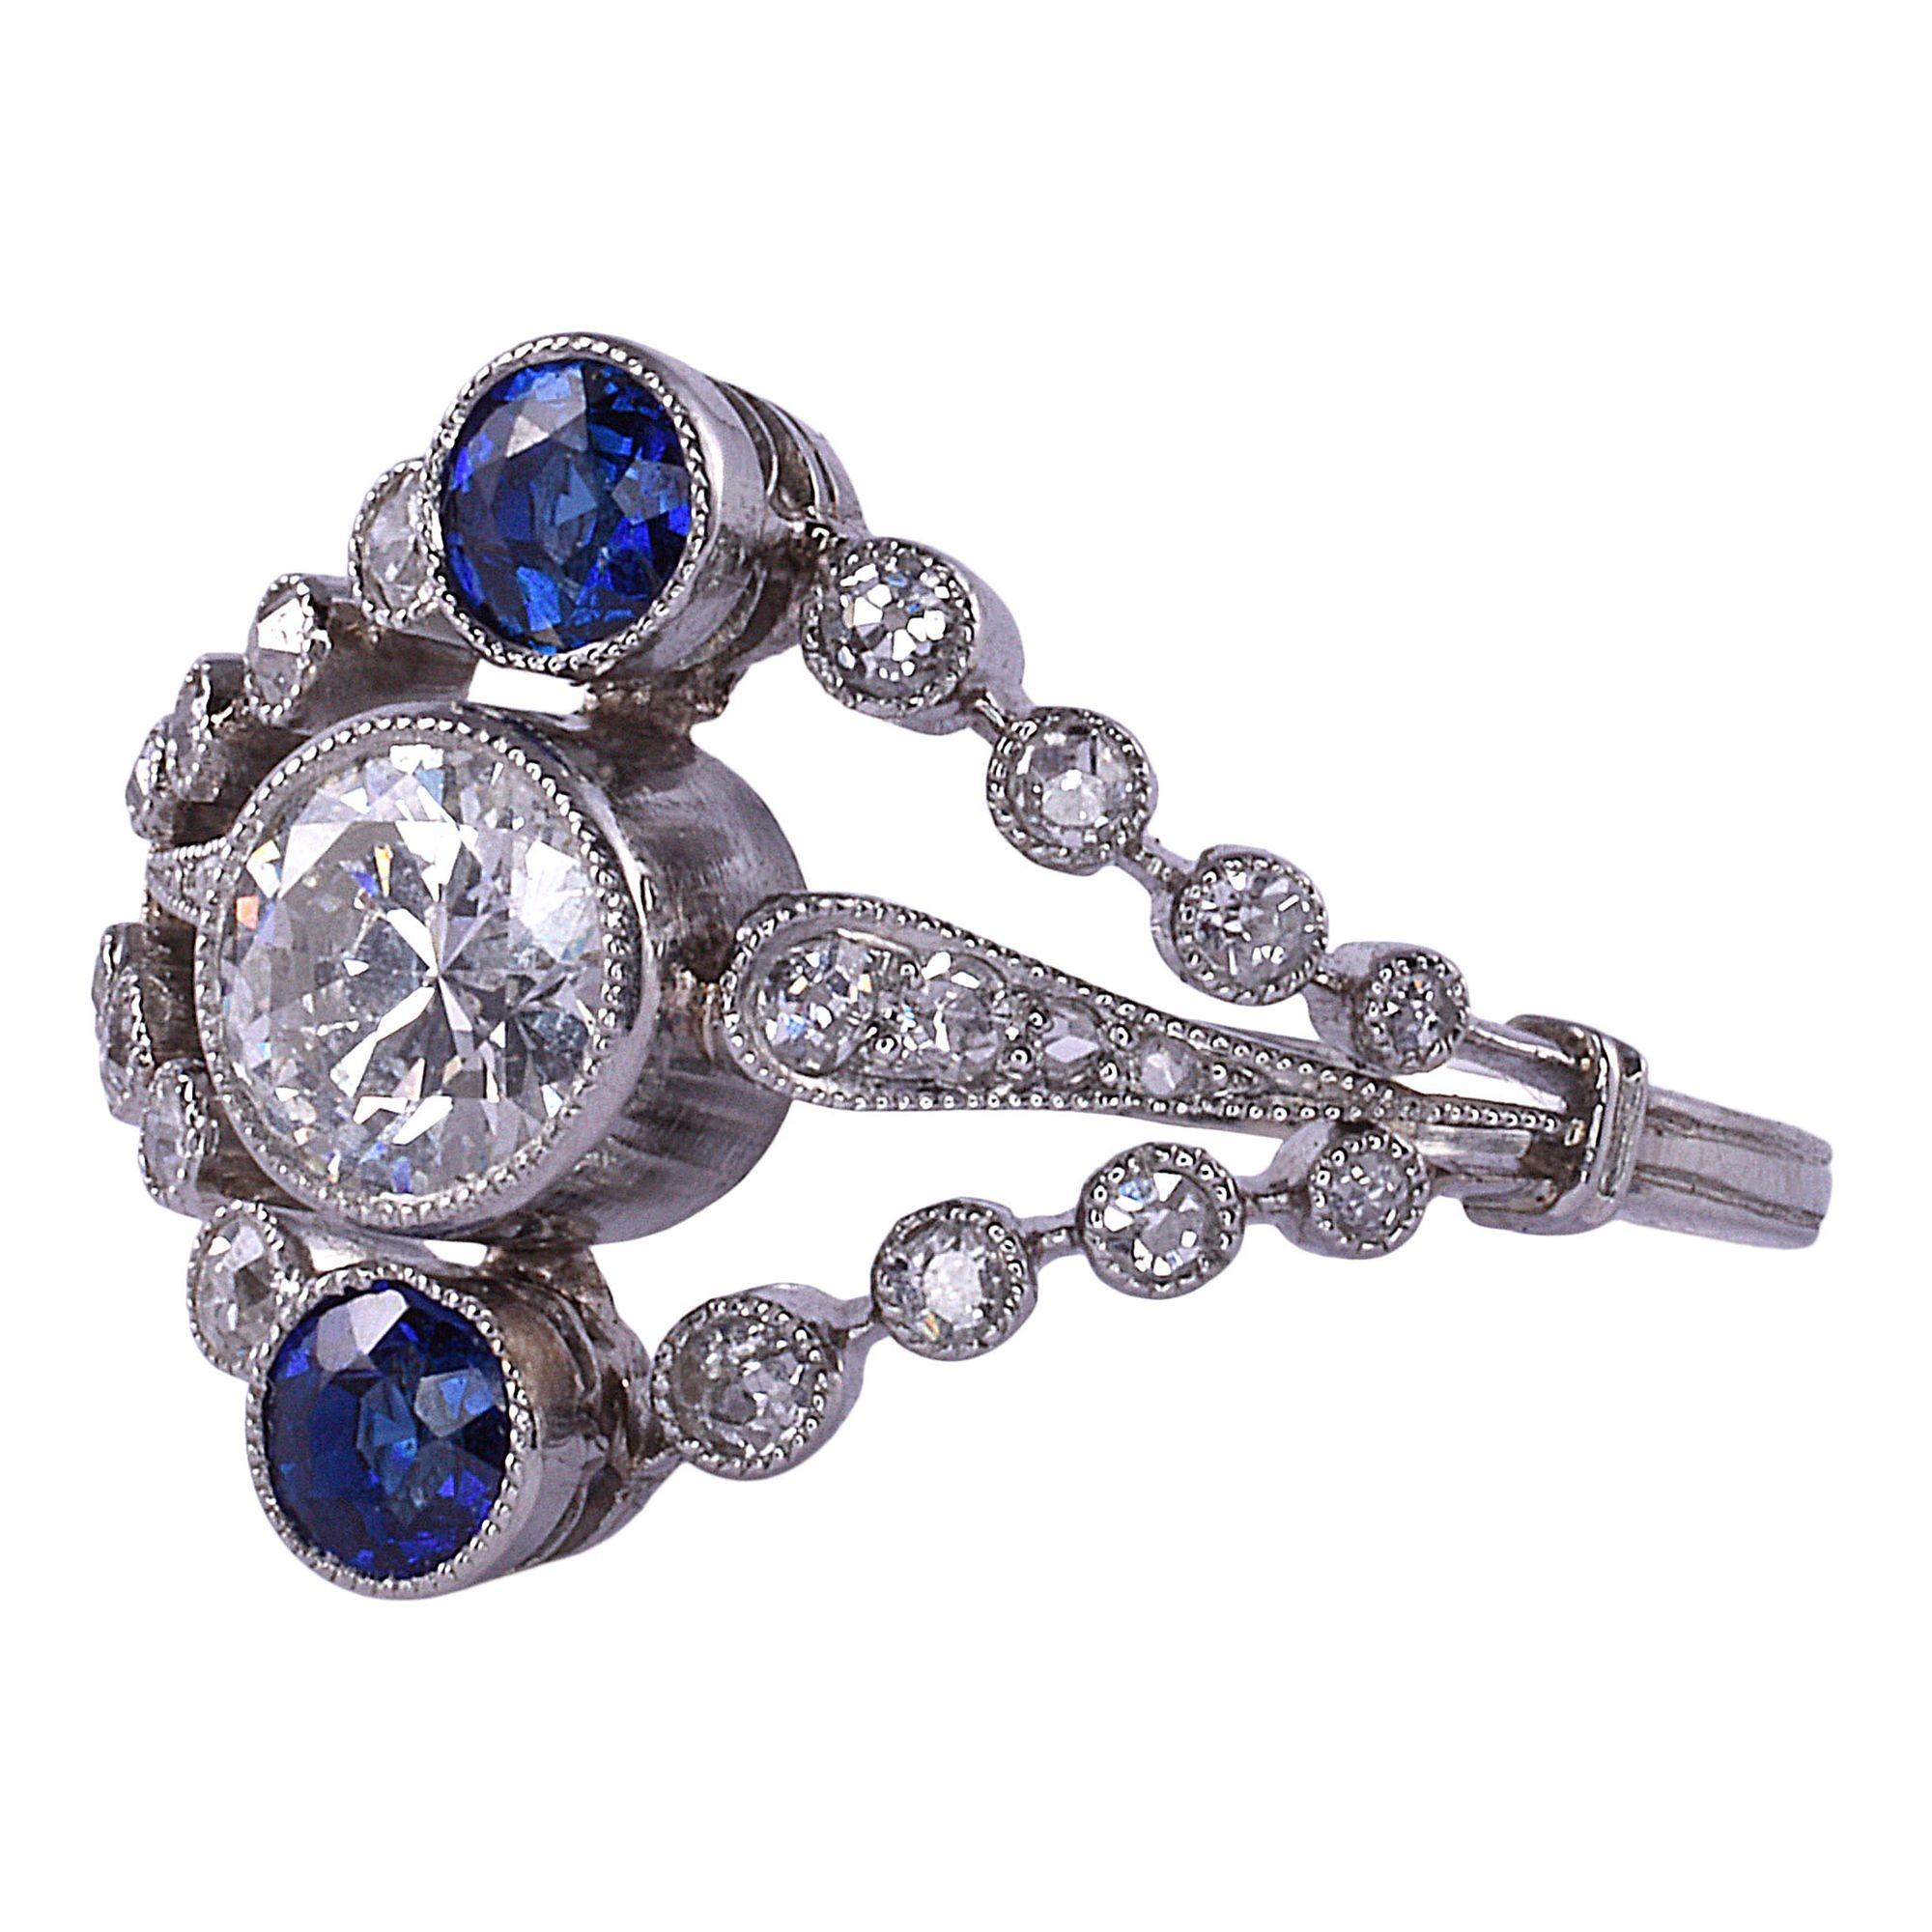 Antique French Edwardian diamond & sapphire platinum ring, circa 1910. This Edwardian ring is crafted in platinum and features a .50 carat center diamond. The center diamond has VS2 clarity and I color. There is a round sapphire above and below with